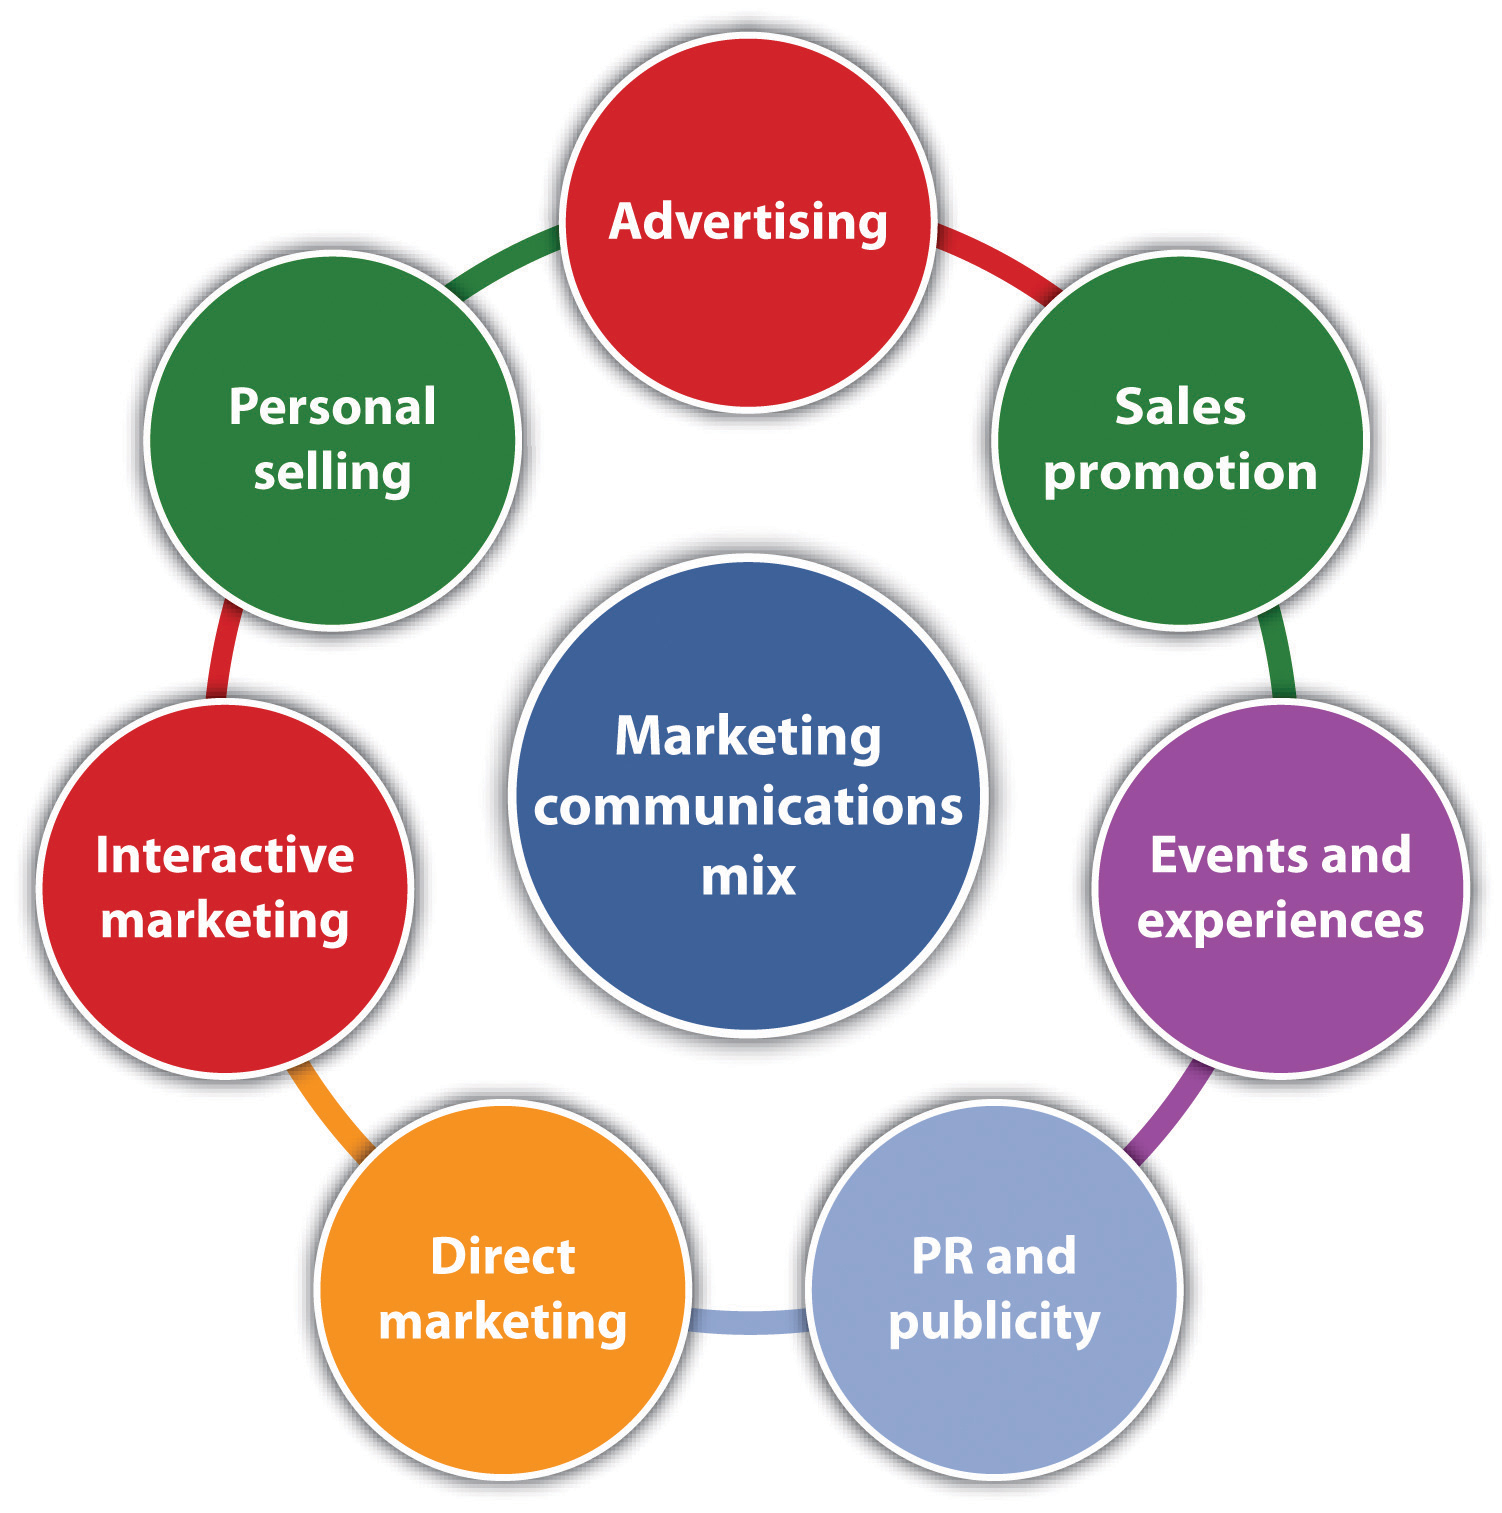 The marketing communications mix - advertising, sales promotion, events and experiences, PR and publicity, direct marketing, interactive marketing, and personal selling